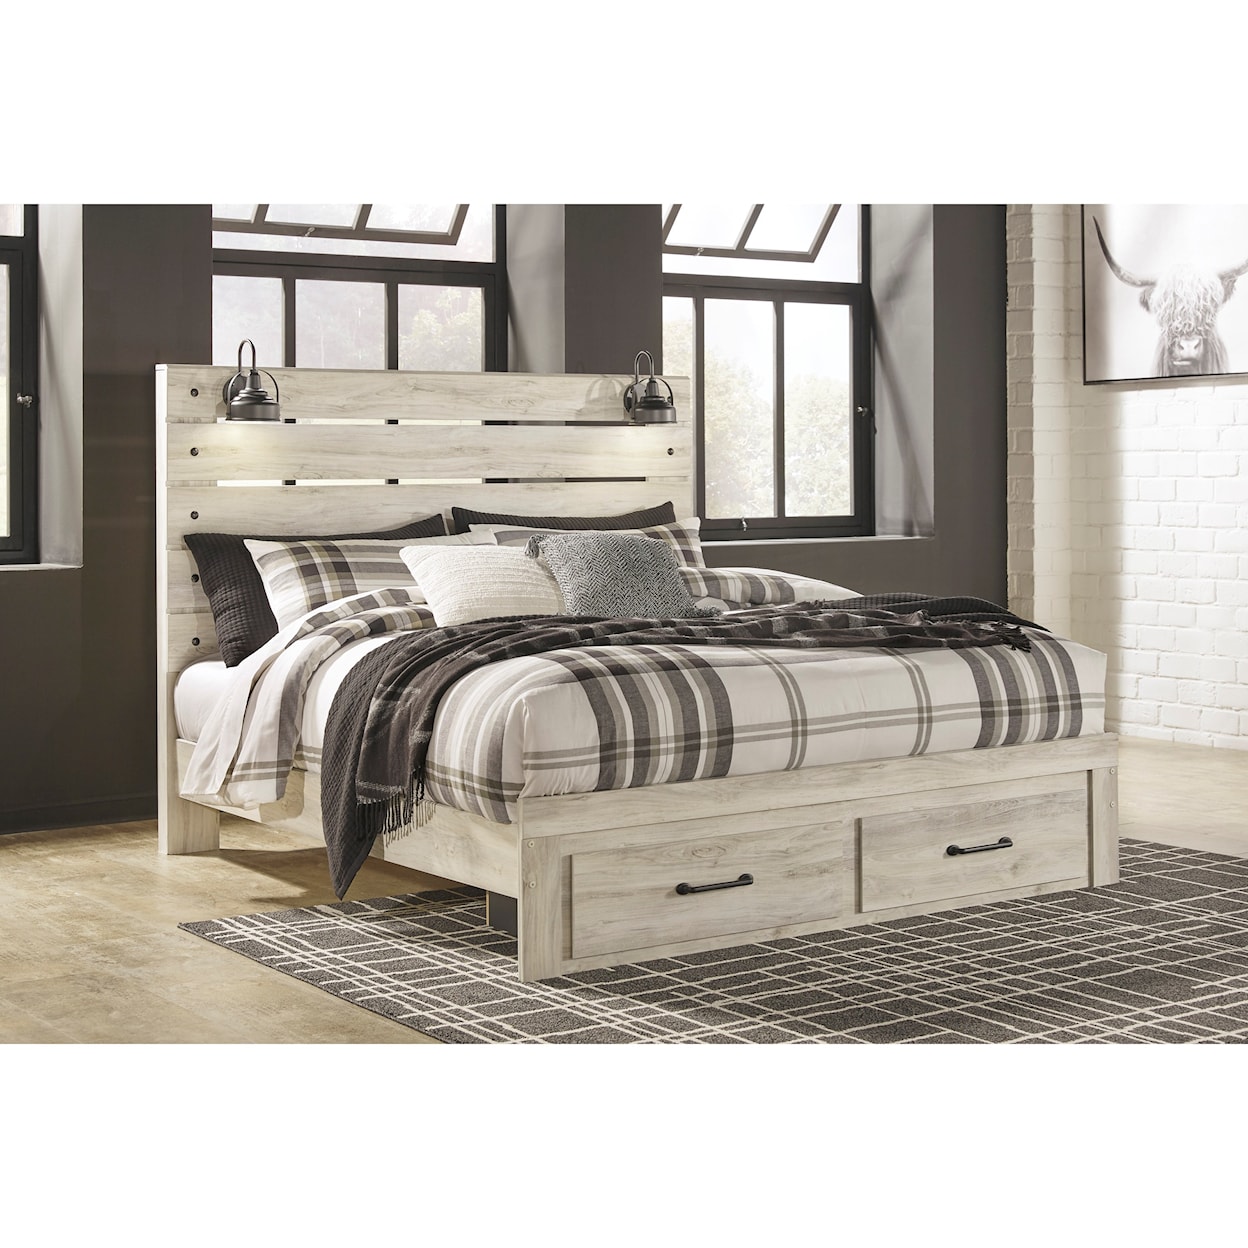 Signature Design Cambeck King Bed w/ Lights & Footboard Drawers